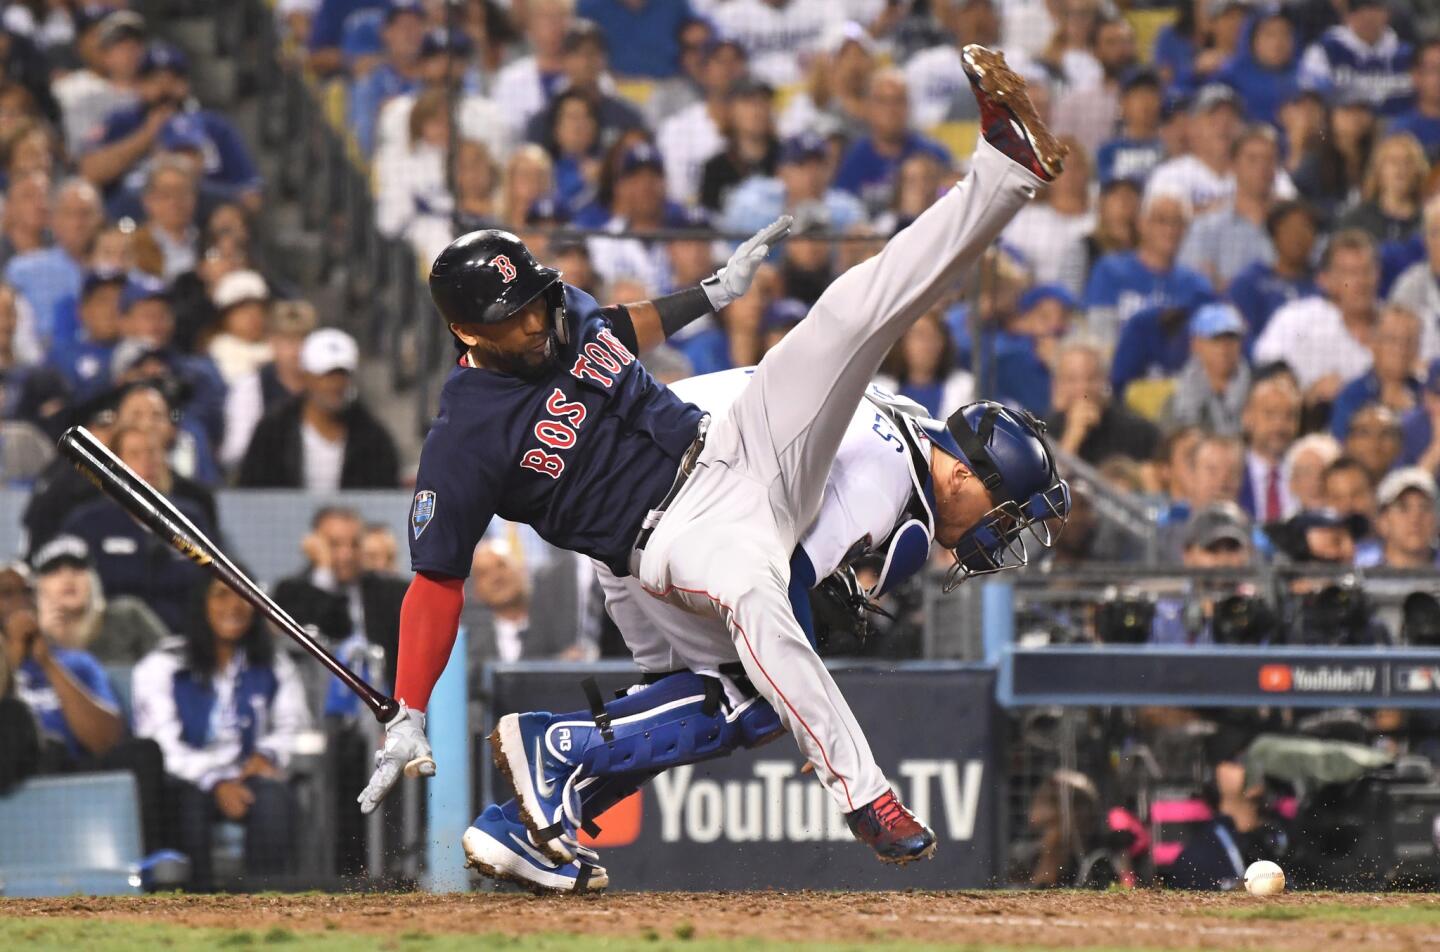 Red Sox batter Eduardo Nunez is upended by Dodgers catcher Austin Barnes in the 13th inning after a foul ball.